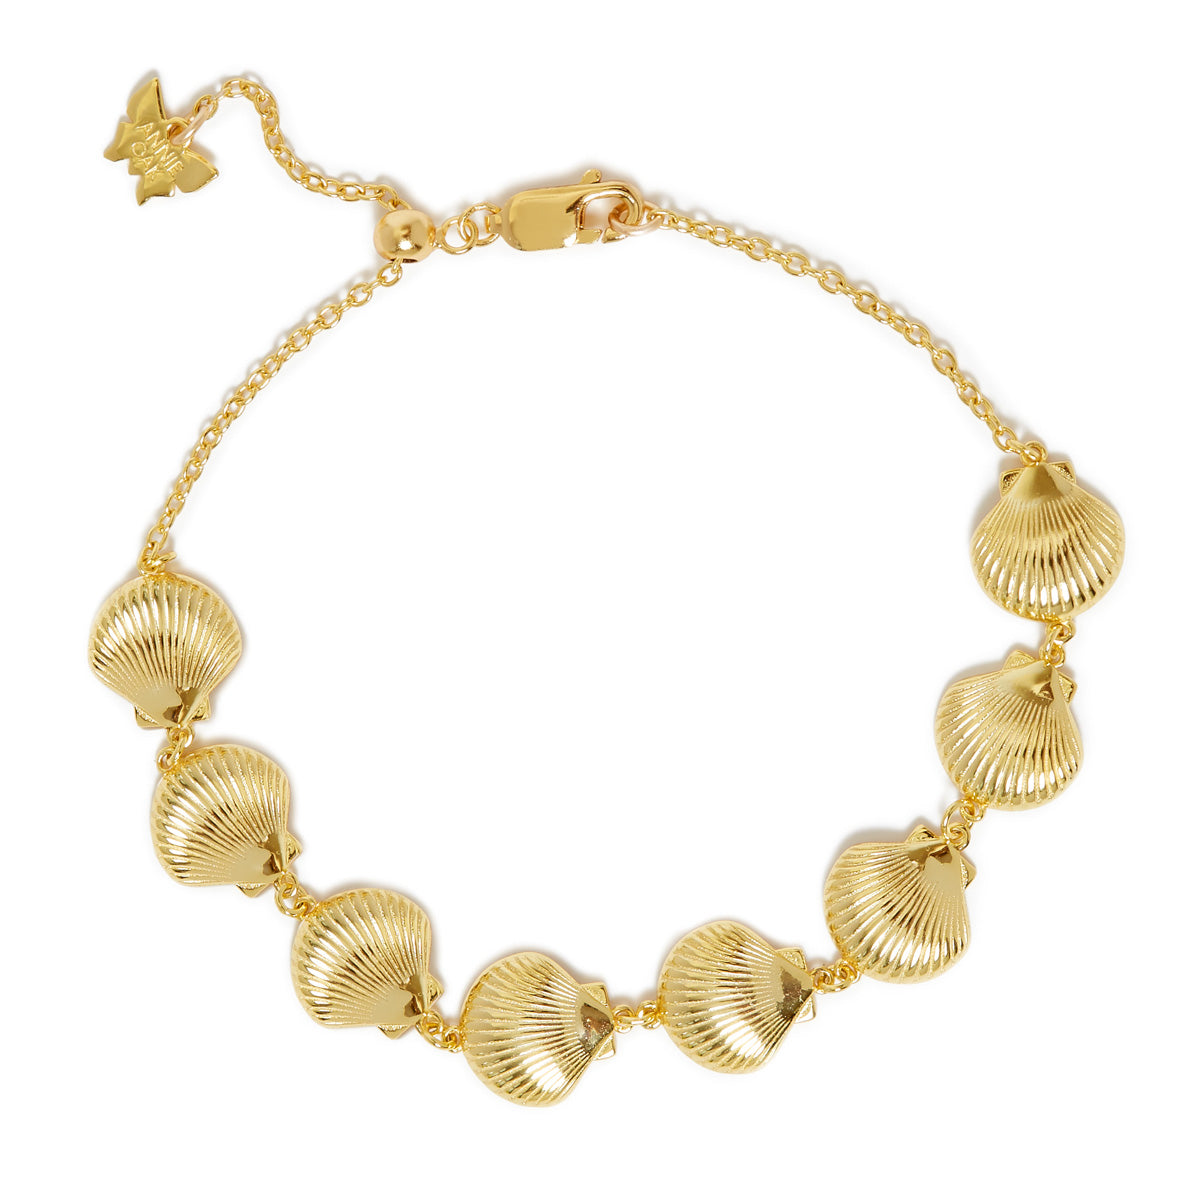 Gold-plated shell bracelet - French designer jewelry